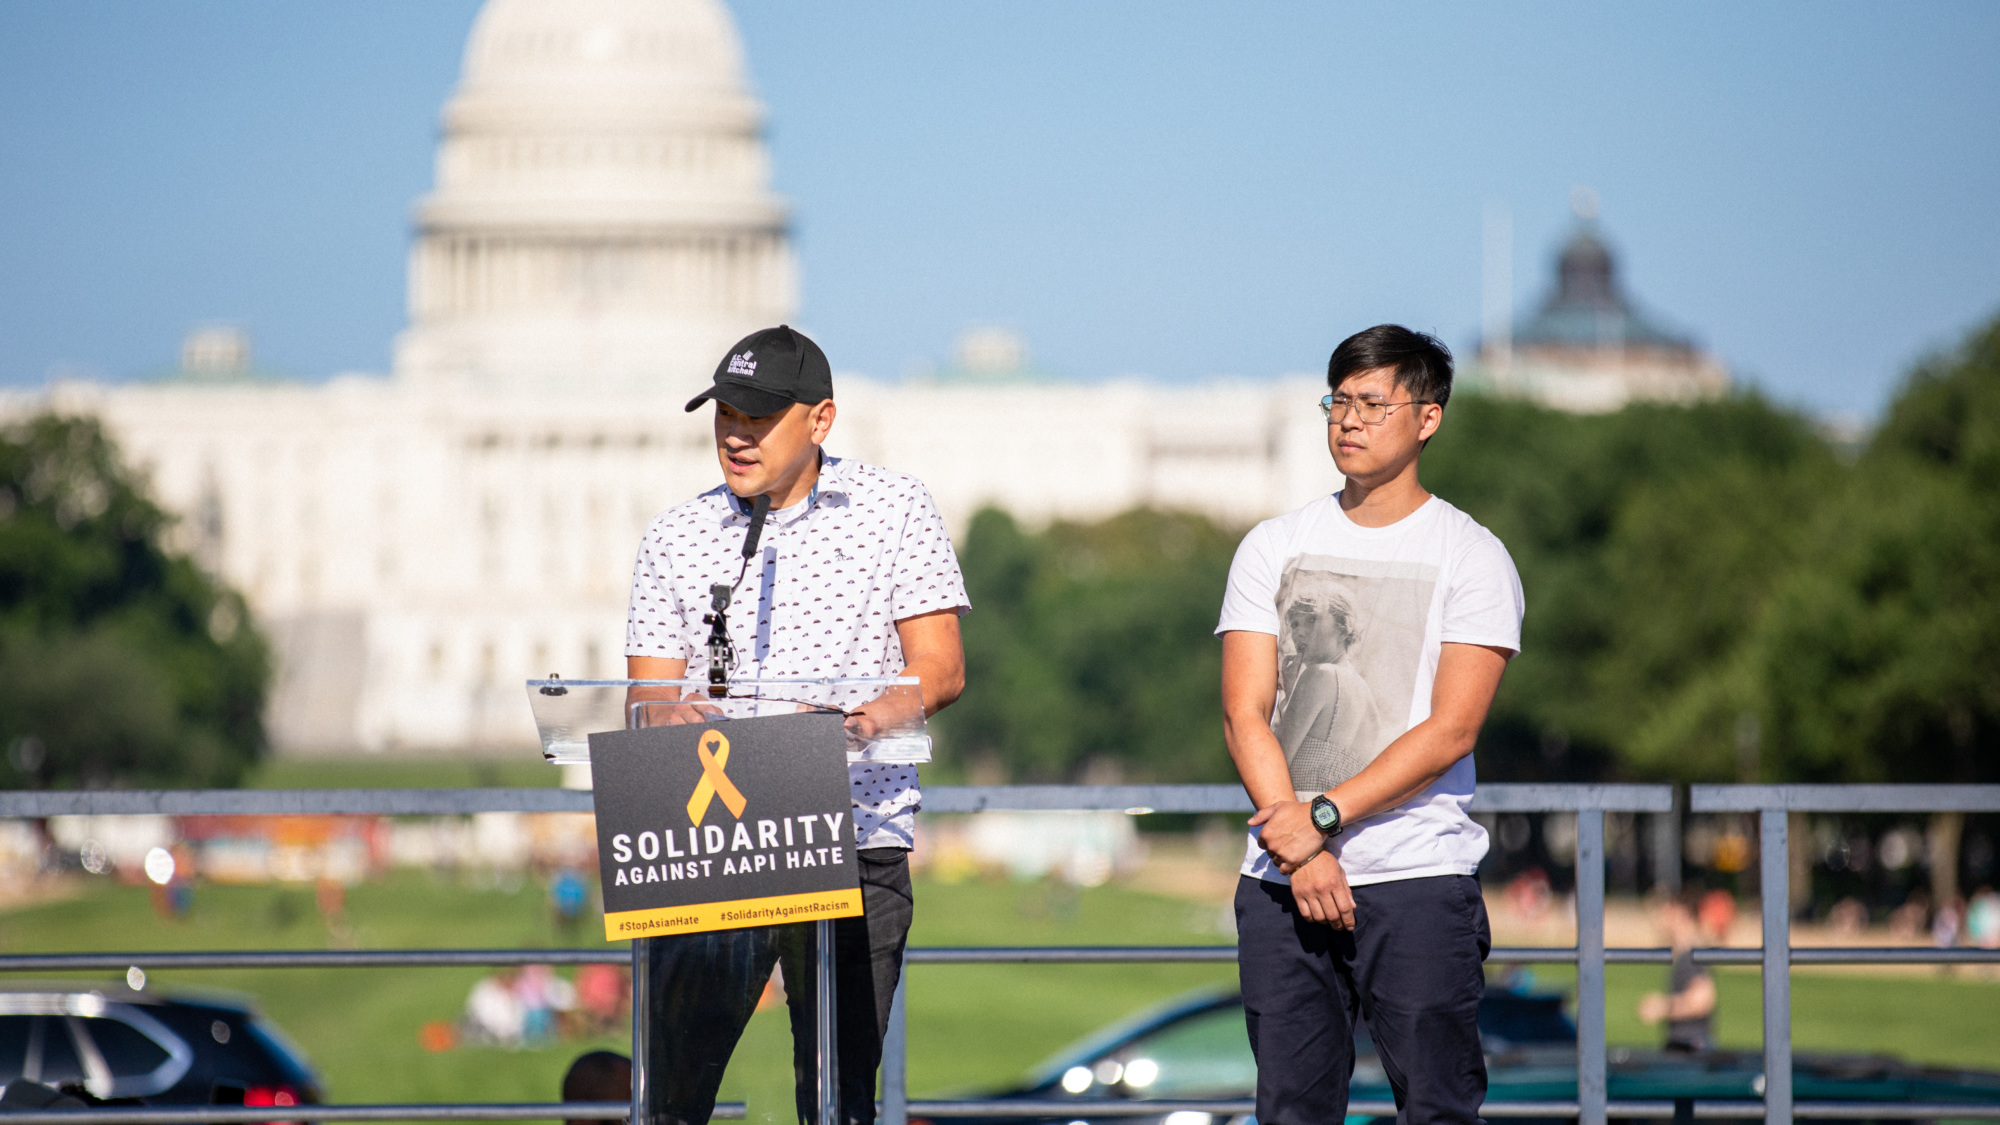 Chefs Stopping AAPI Hate founders Tim Ma (left) and Kevin Tien (right).